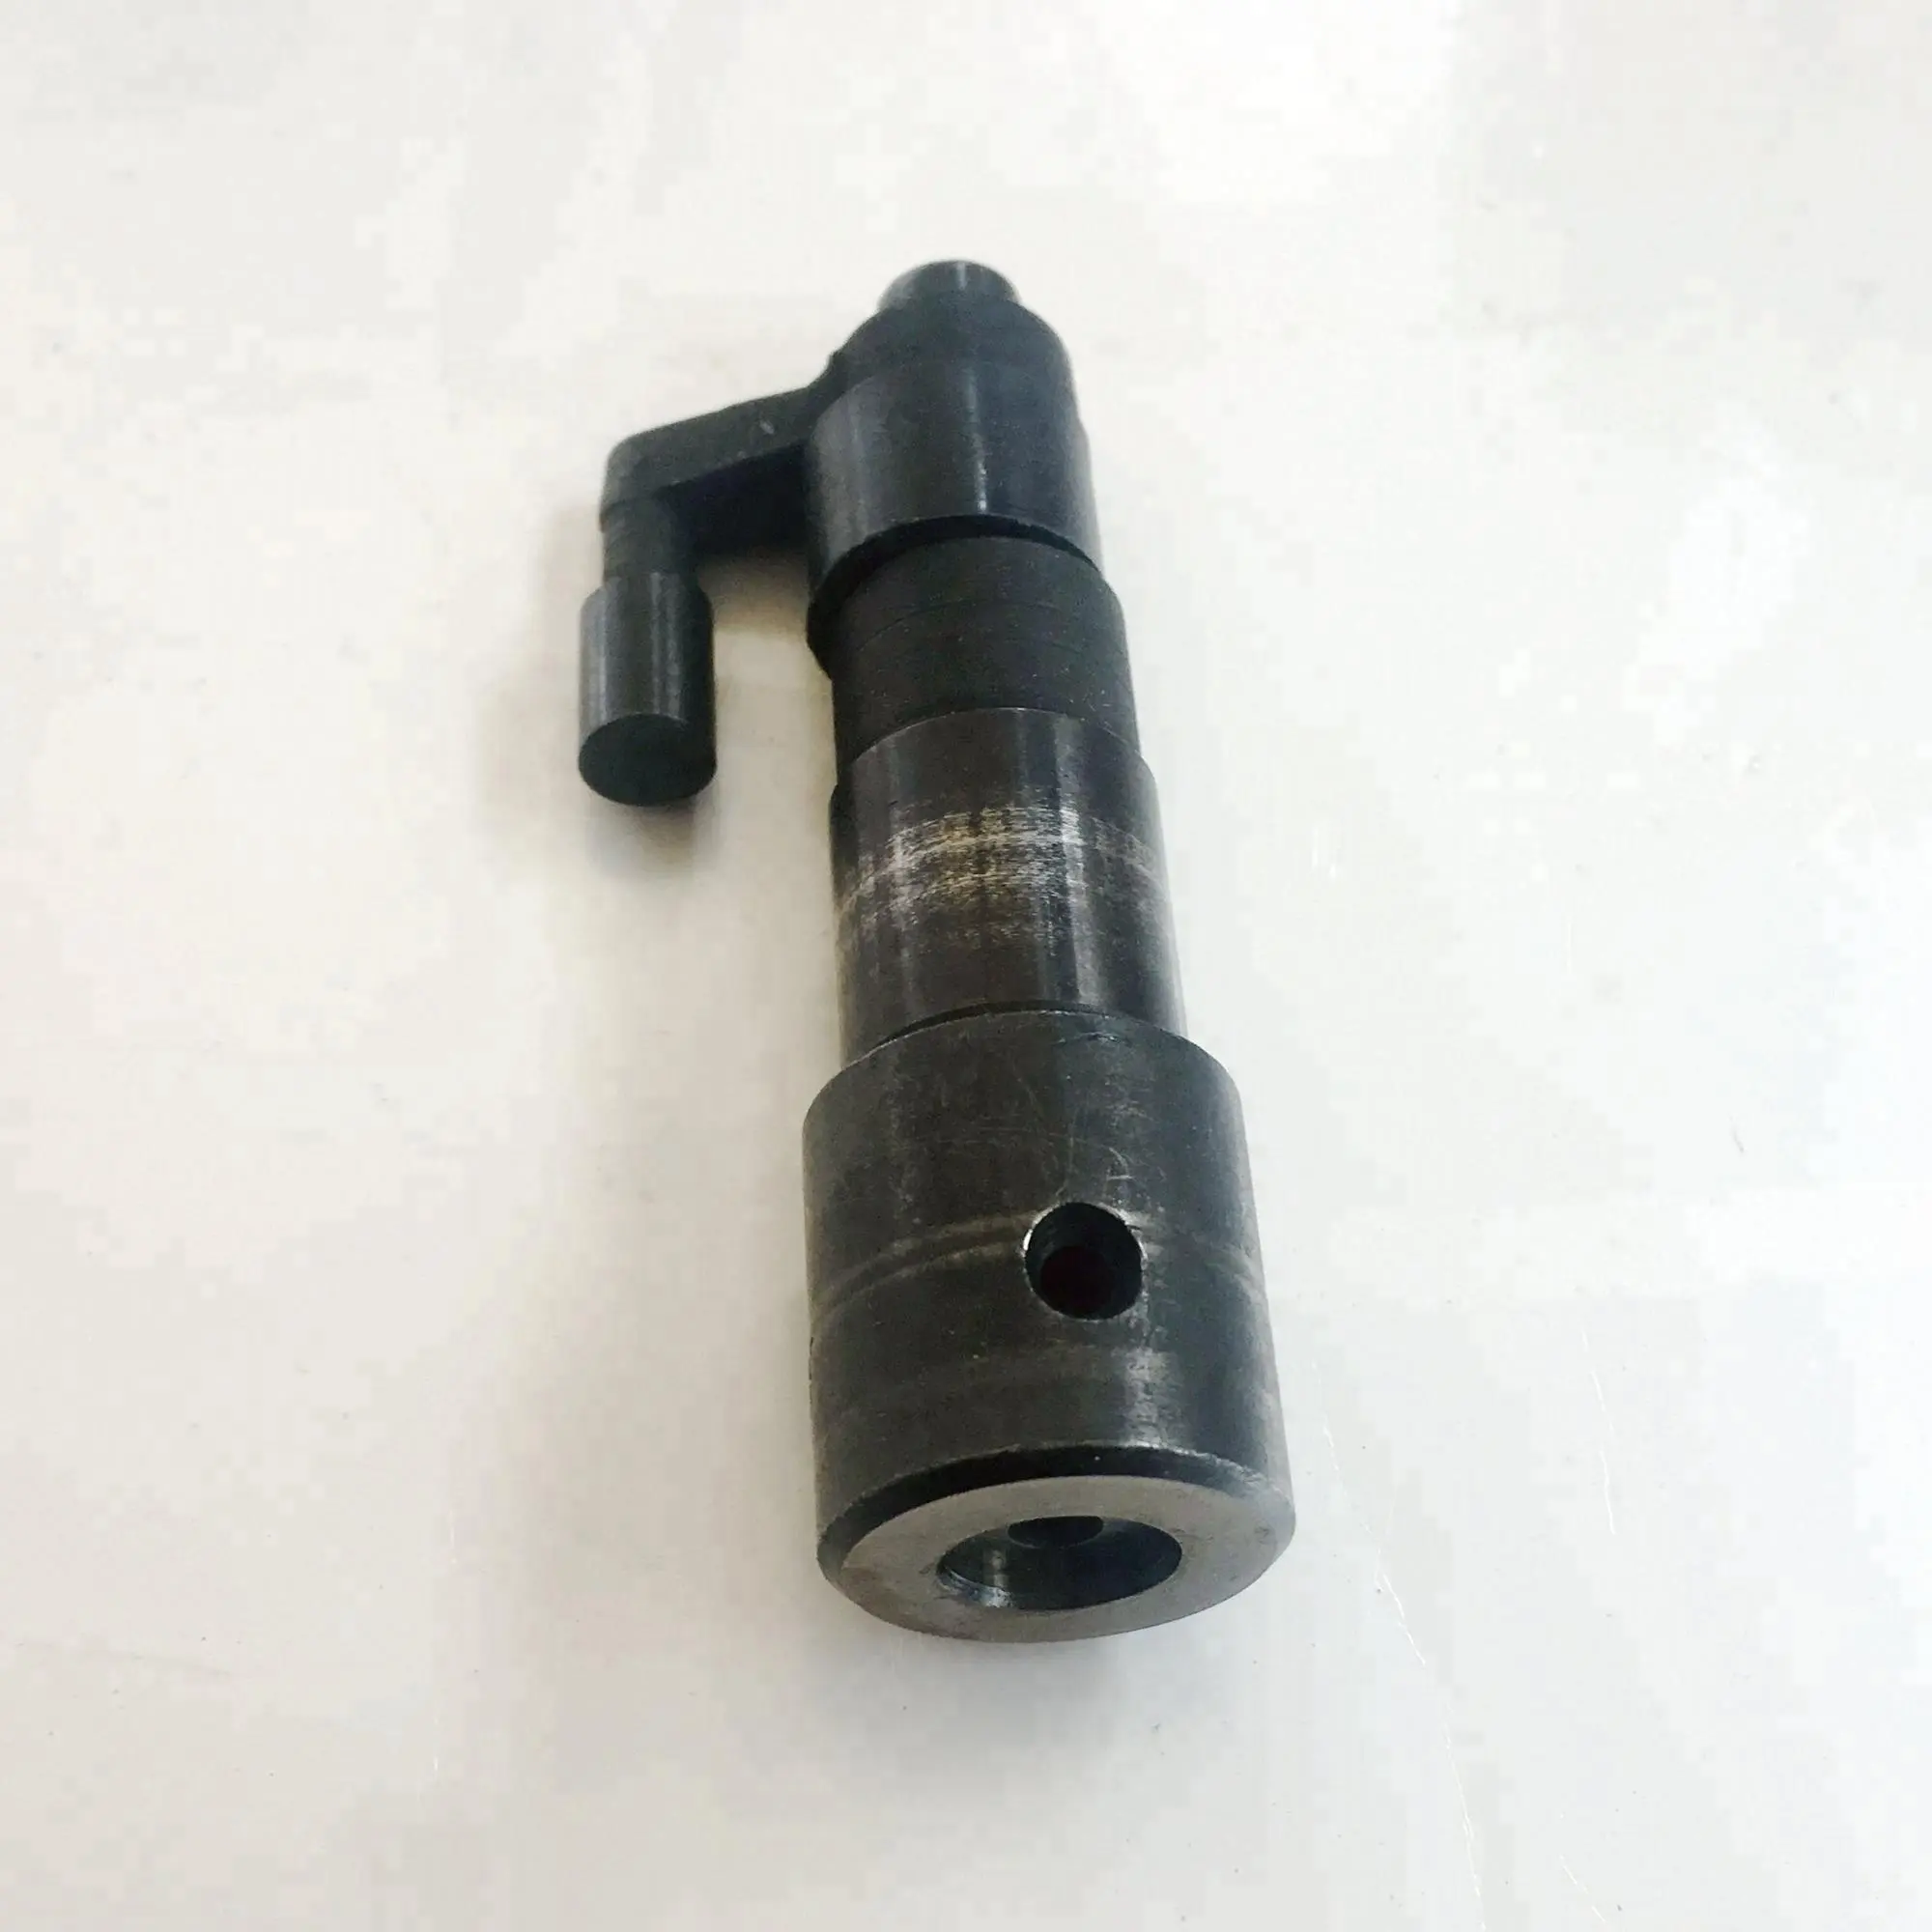 YTO Dongfeng Tractor Diesel Engine Parts Plunger